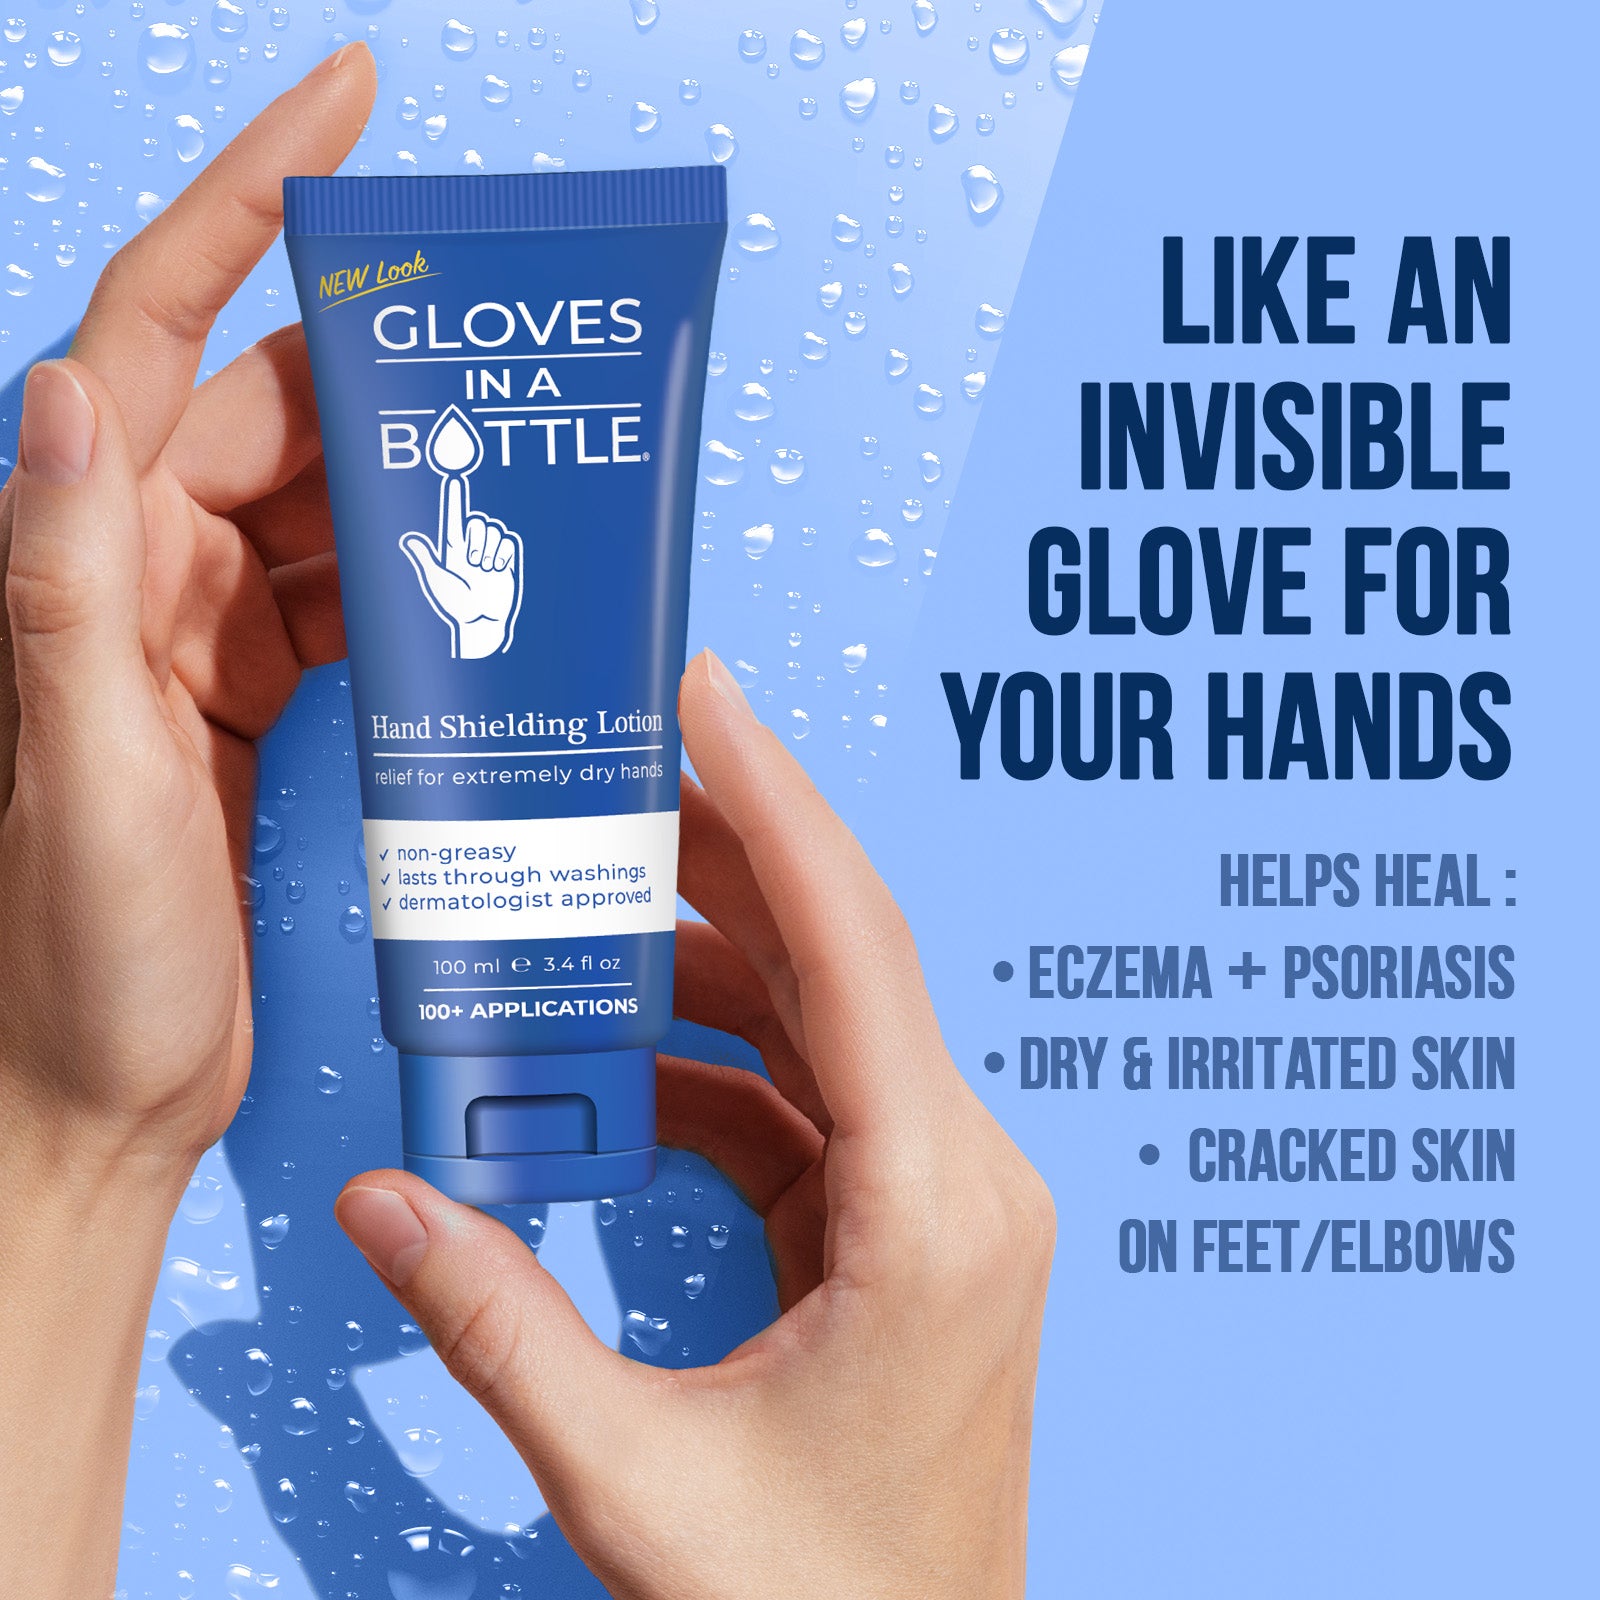 Gloves In A Bottle Hand Shielding Lotion for Dry Skin, 3.4 Ounce (10 pack)